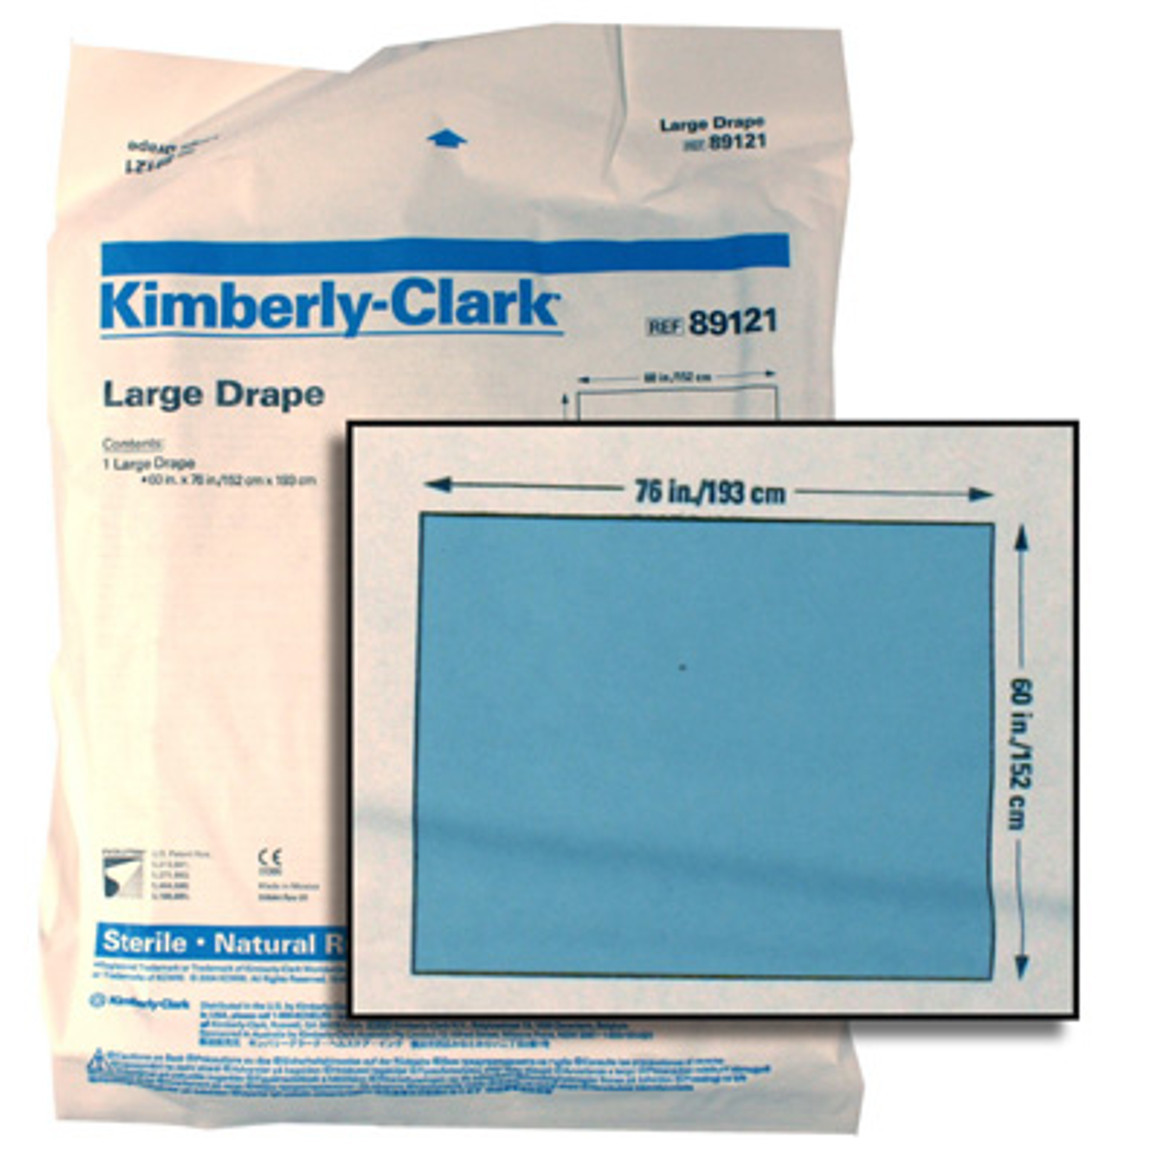 Kimberly-Clark Evolution 4 Fabric-Reinforced Surgical Gown at best price in  New Delhi